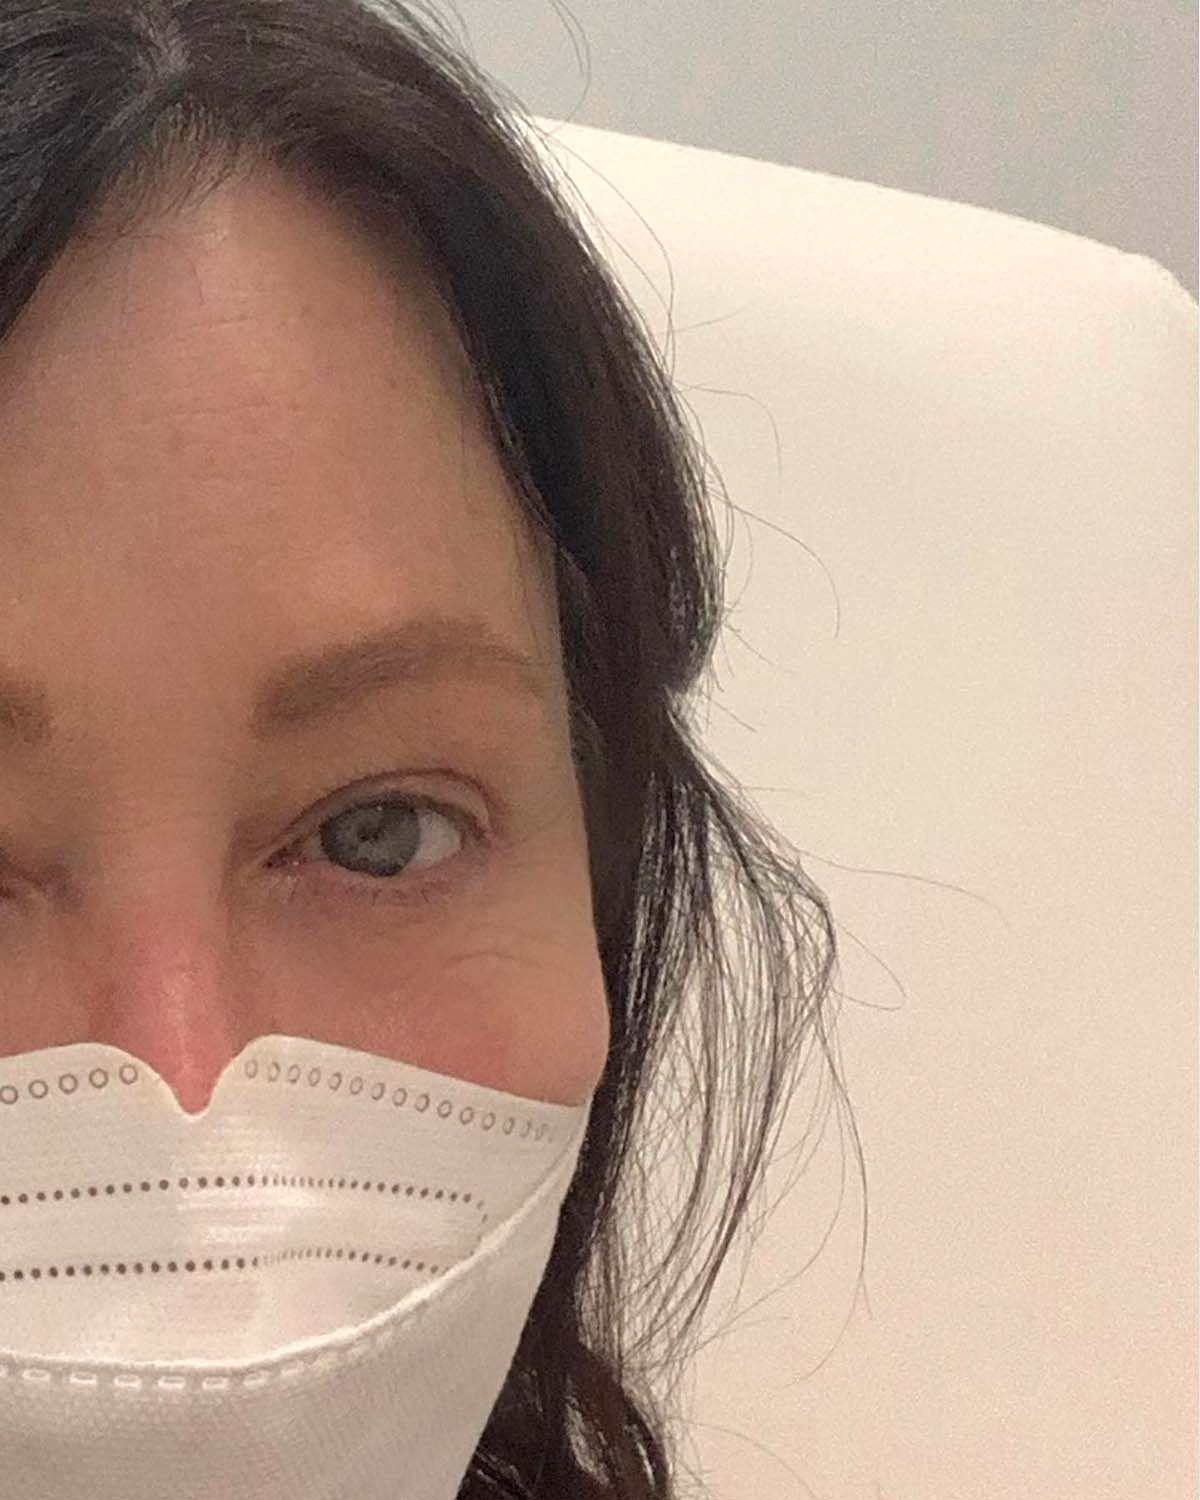 Shannen Doherty Through Years From Her Career Highs Her Health Struggles